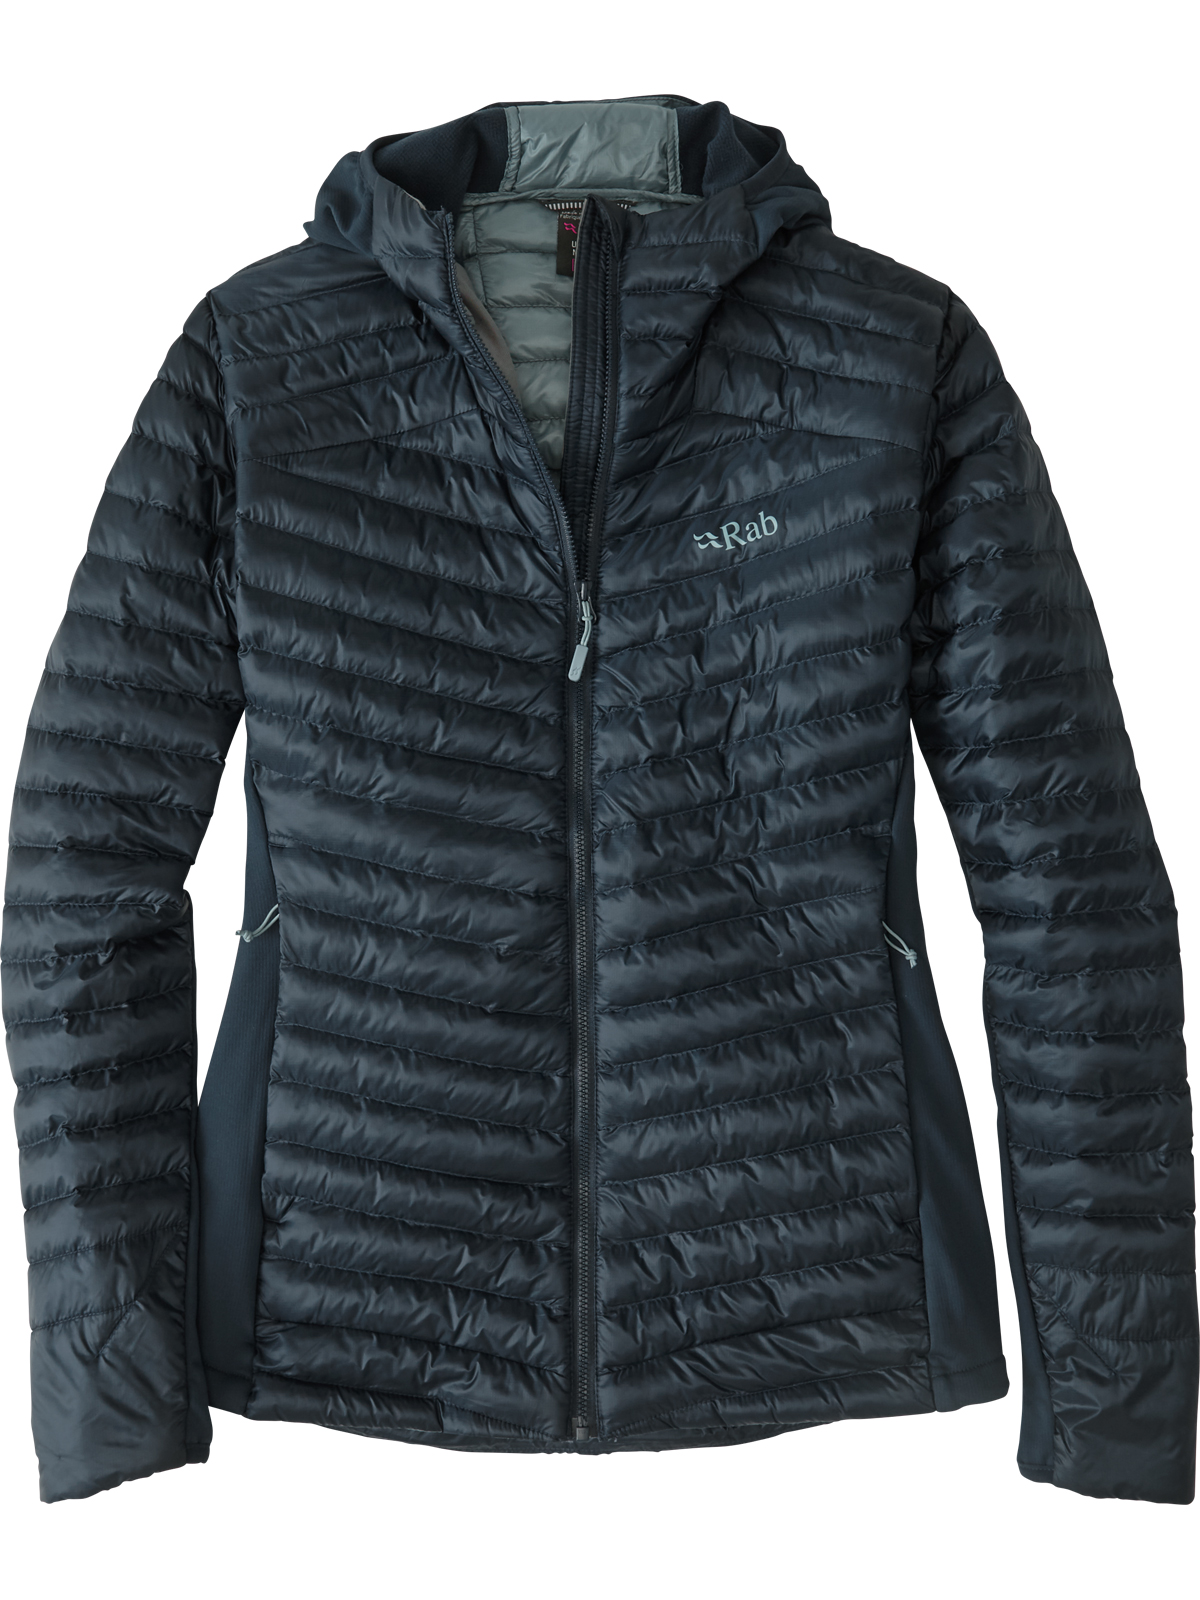 Get puffy with it: Women's Puffer Insualted Jackets | Title Nine